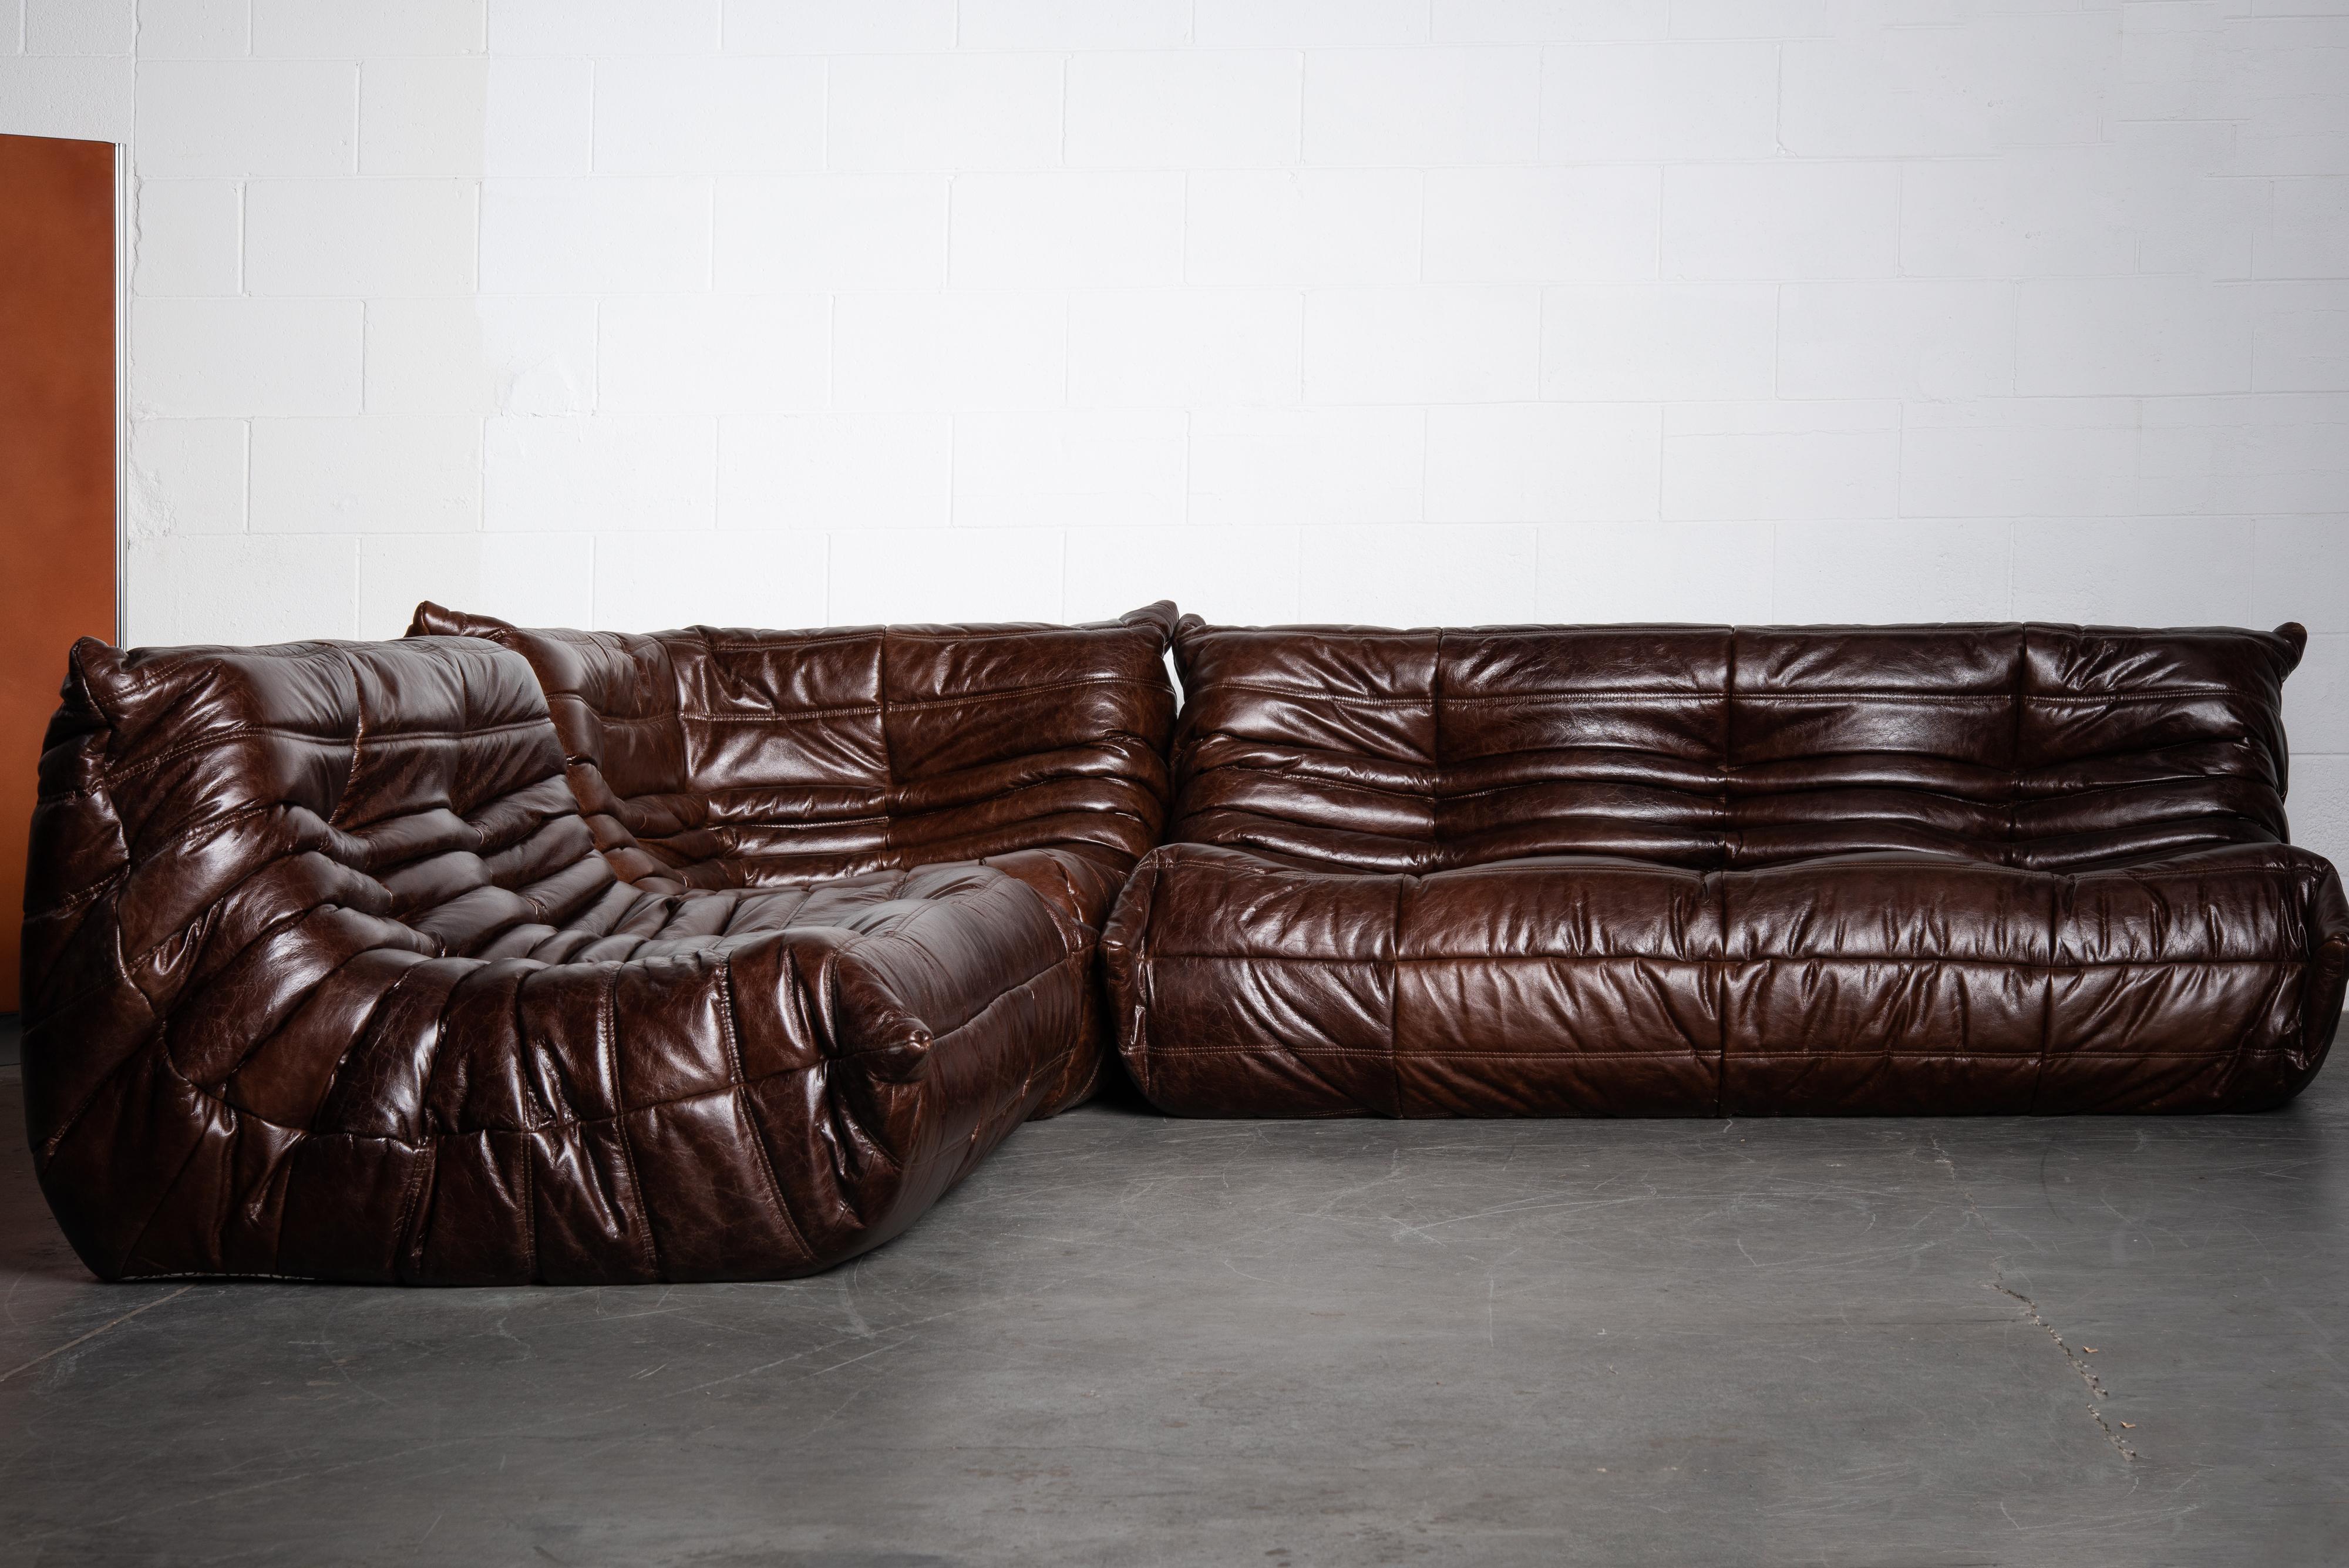 This incredible three (3) piece dark brown leather Togo sectional living room set, was designed by Michel Ducaroy in 1973 for Ligne Roset, France. Comprised of a three-seat sofa, two-seater loveseat and a corner seat. Signed with Ligne Roset